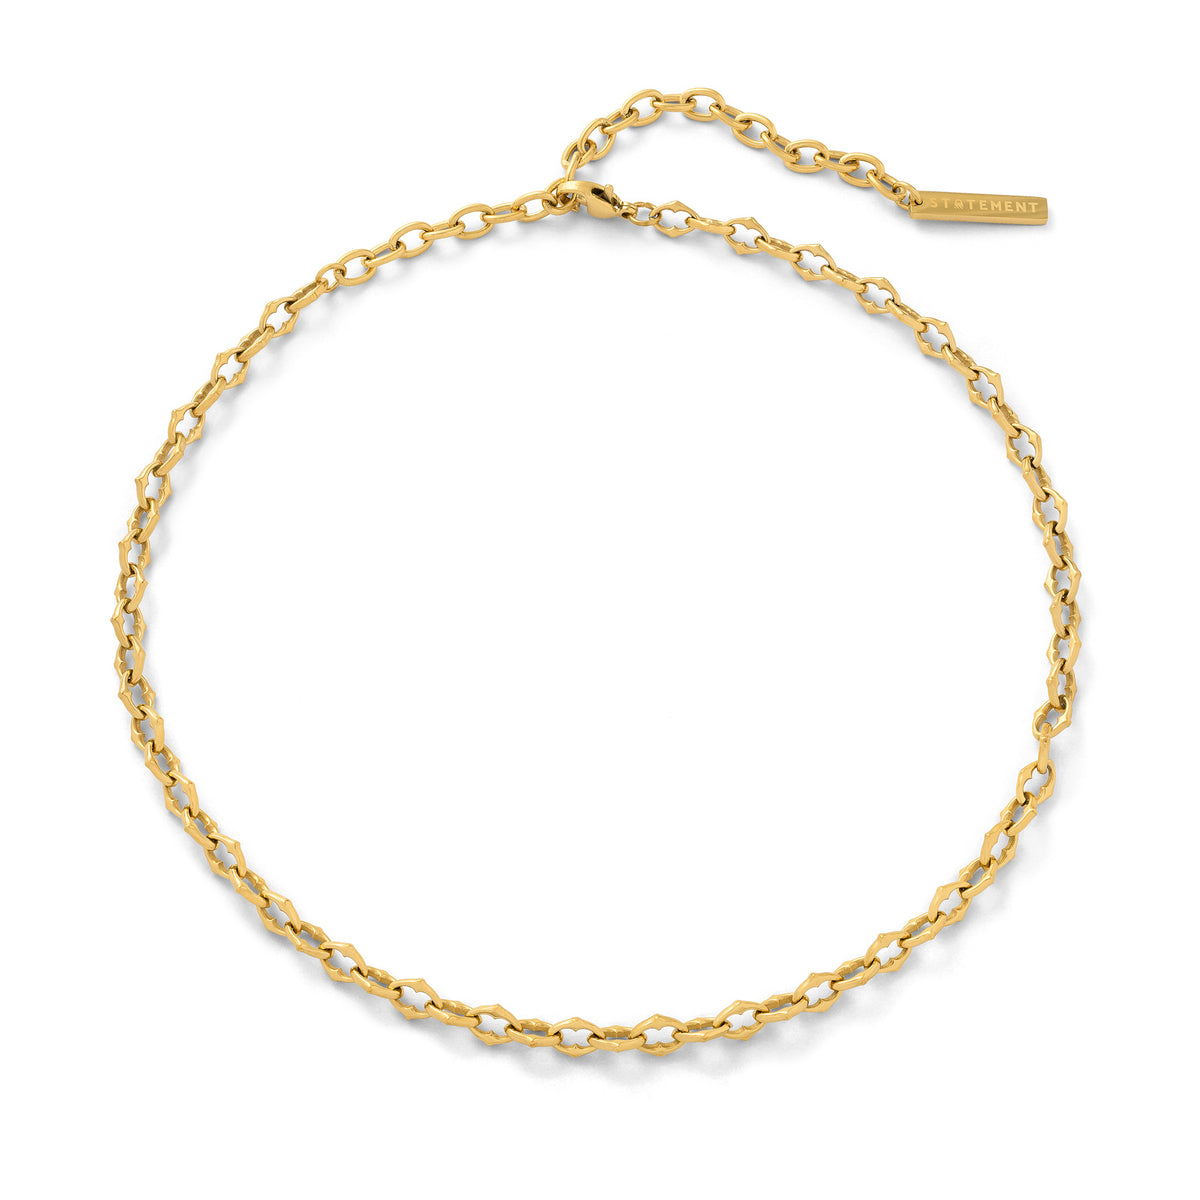 Spiked chain link necklace in gold